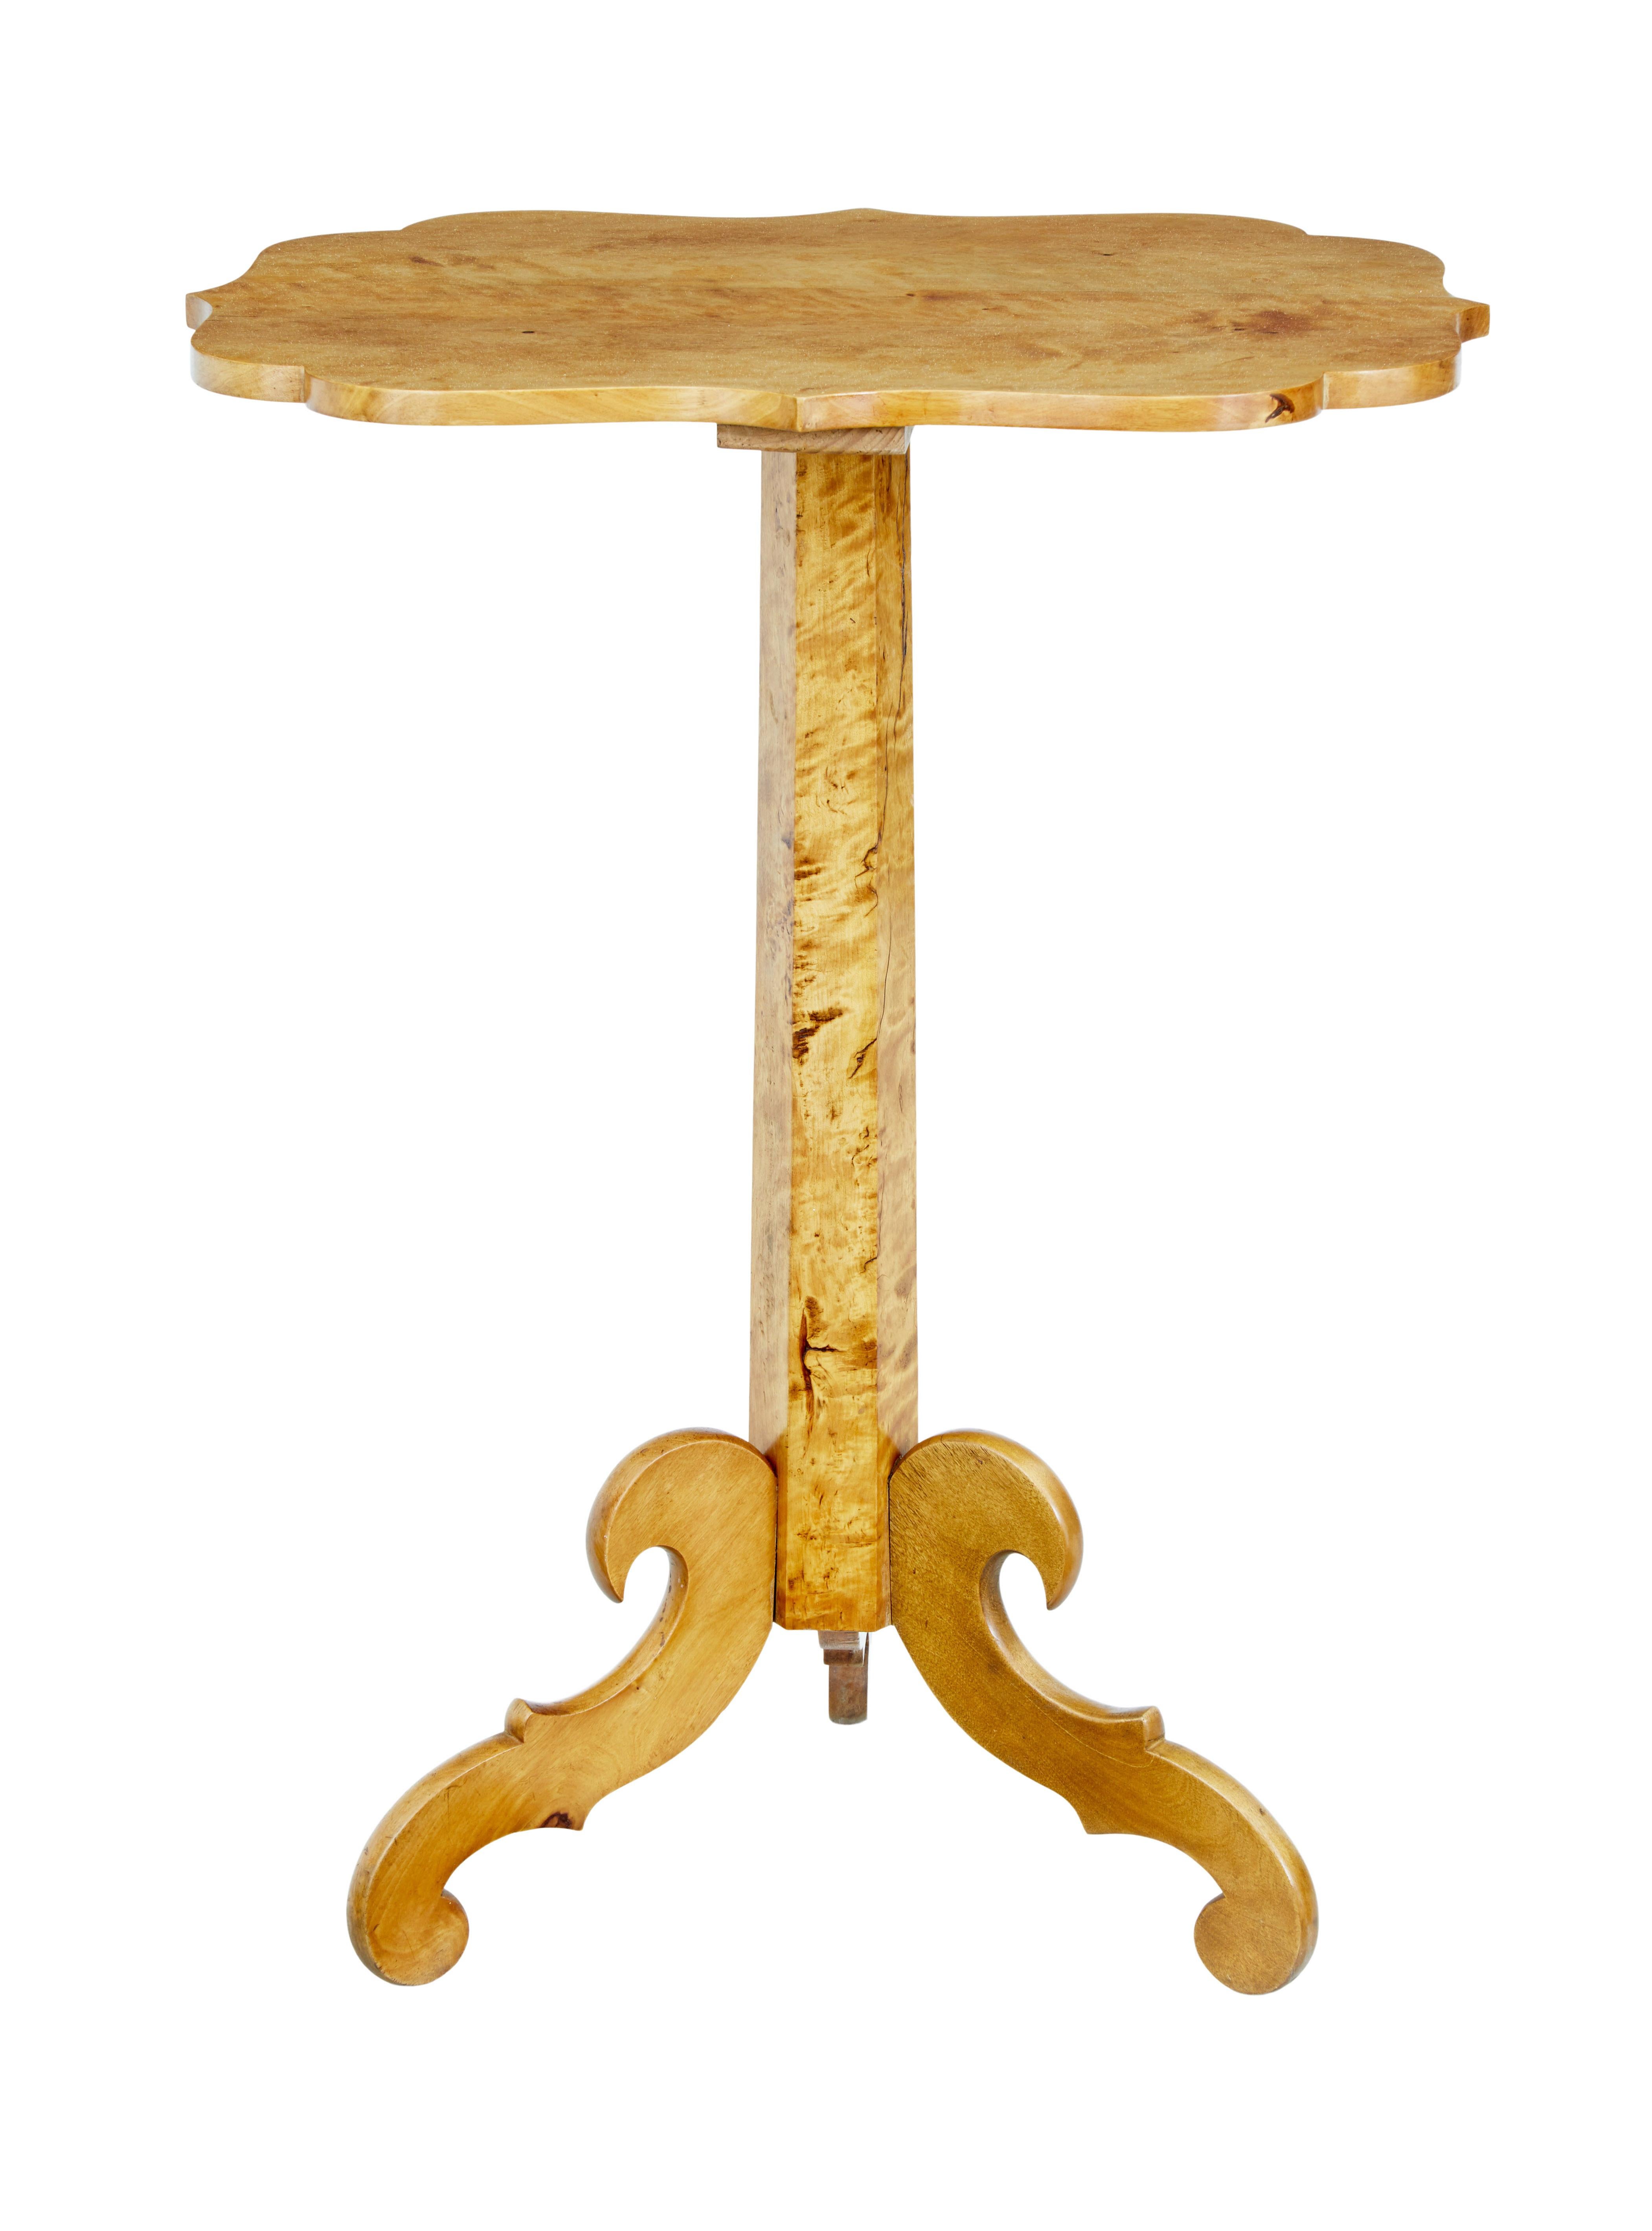 Good quality birch occasional table, circa 1890.

Golden colored shaped birch top surface. Standing on a hexagonal stem, supported by 3 scrolled legs.

Ideal for use a side table or in the hallway.